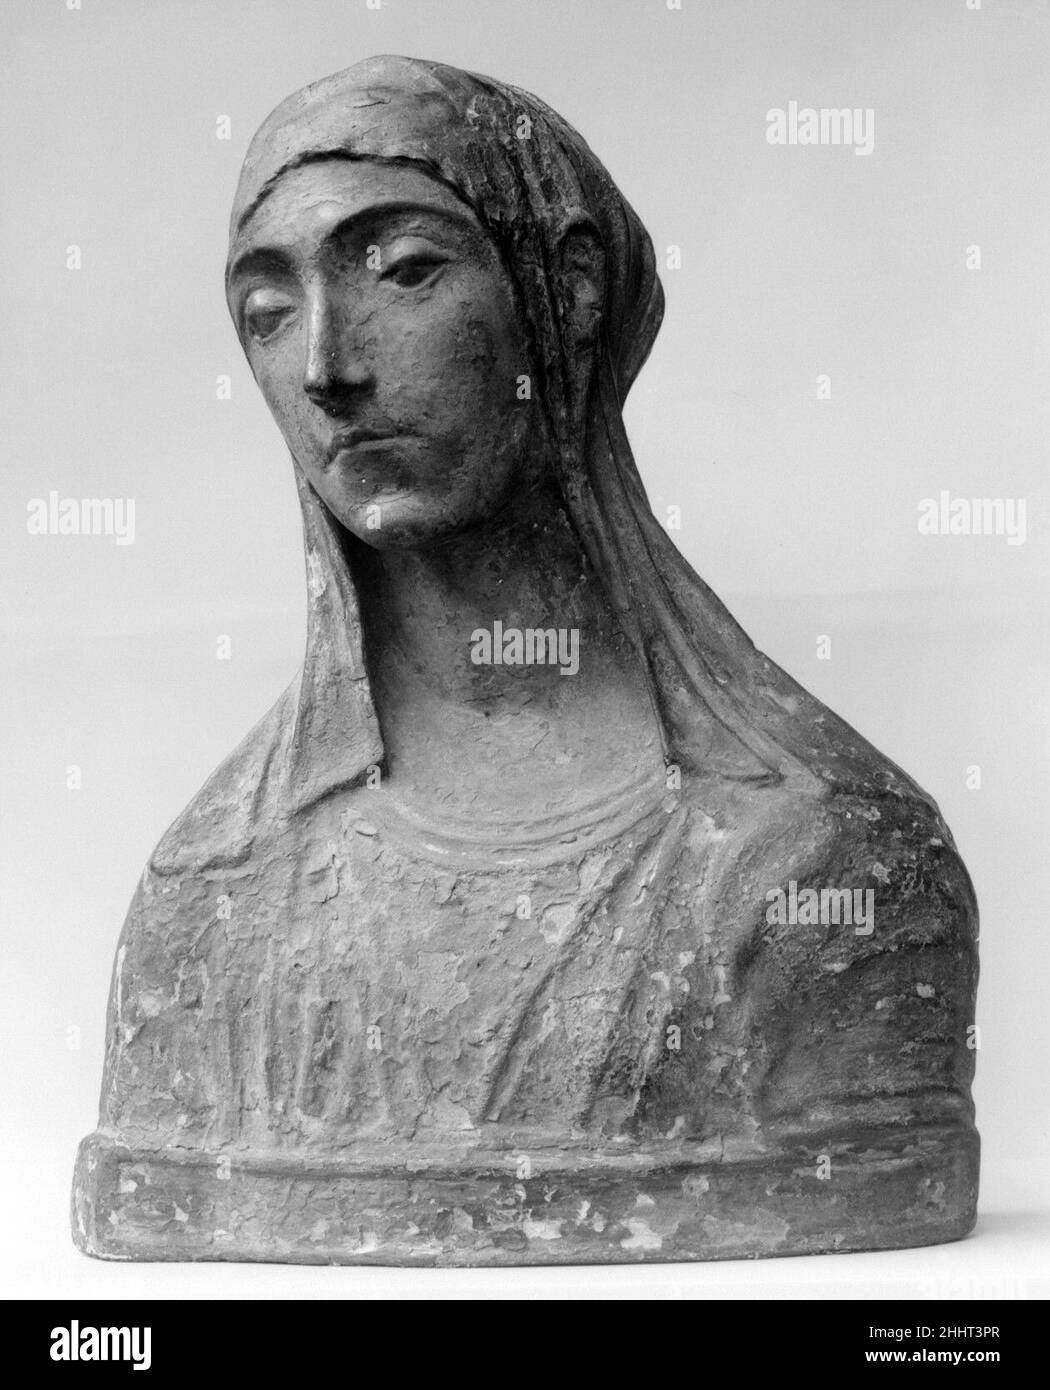 Virgin Mary (probably) late 15th century After a composition by Mino da Fiesole (Mino di Giovanni) Italian After a composition by Mino da Fiesole represented by a marble in the National Gallery of Art, Washington.. Virgin Mary (probably). After a composition by Mino da Fiesole (Mino di Giovanni) (Italian, Papiano or Montemignaio 1429–1484 Florence). Italian, Florence or Rome. late 15th century. Stucco, polychromed. Sculpture Stock Photo